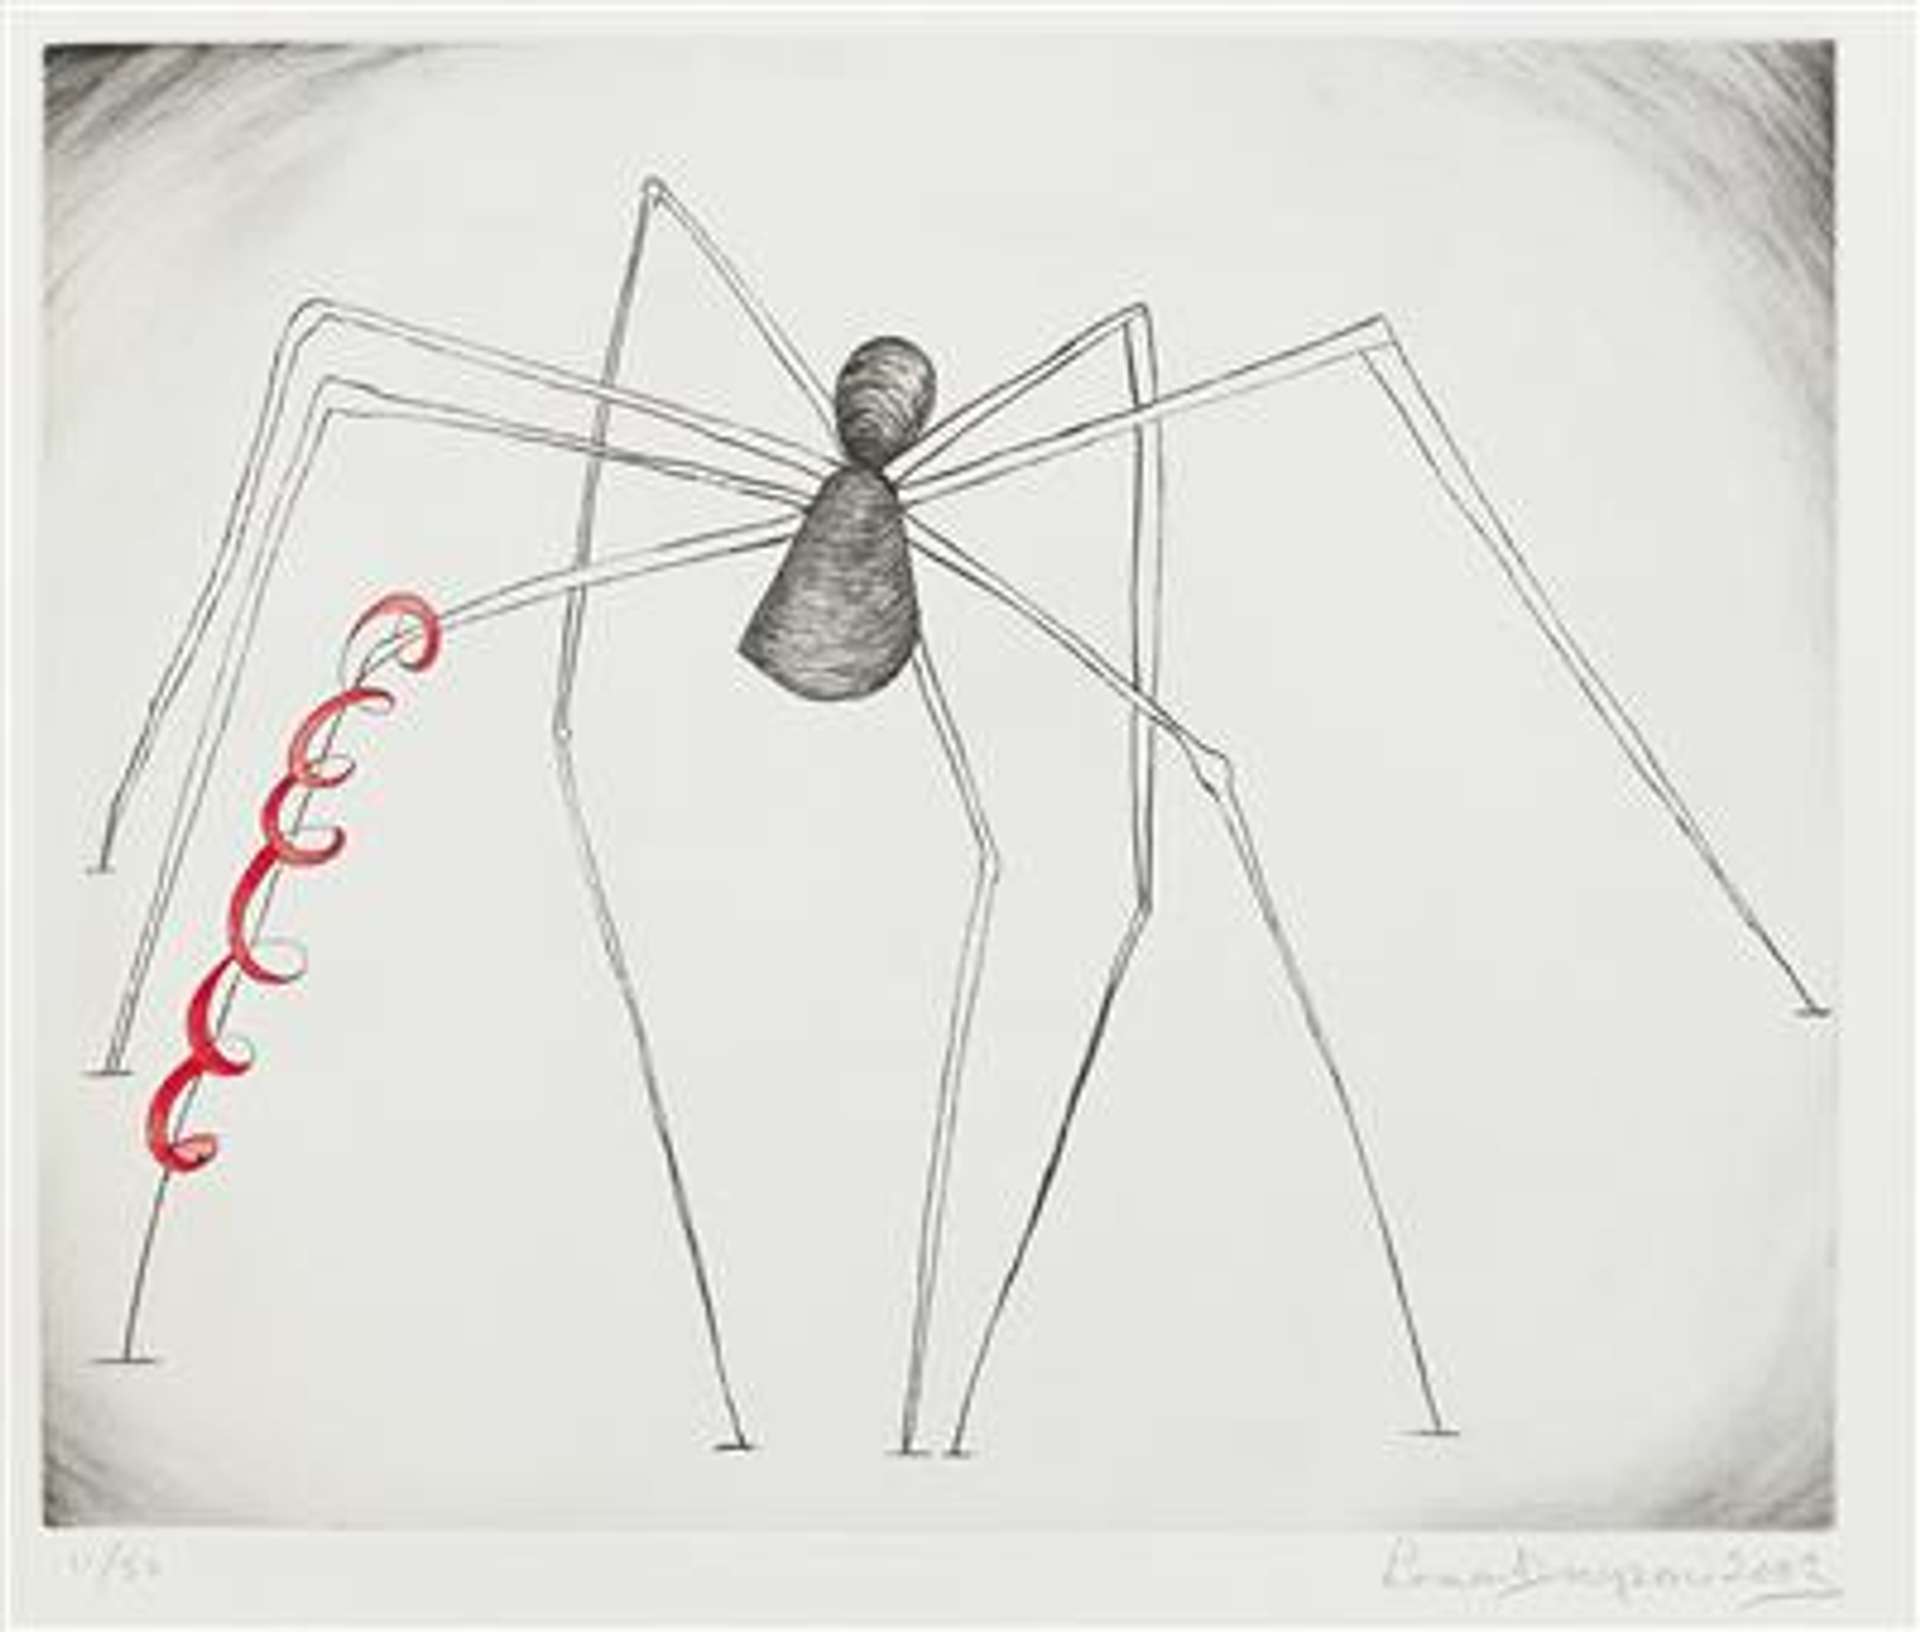 Louise Bourgeois: a web of emotions, Louise Bourgeois